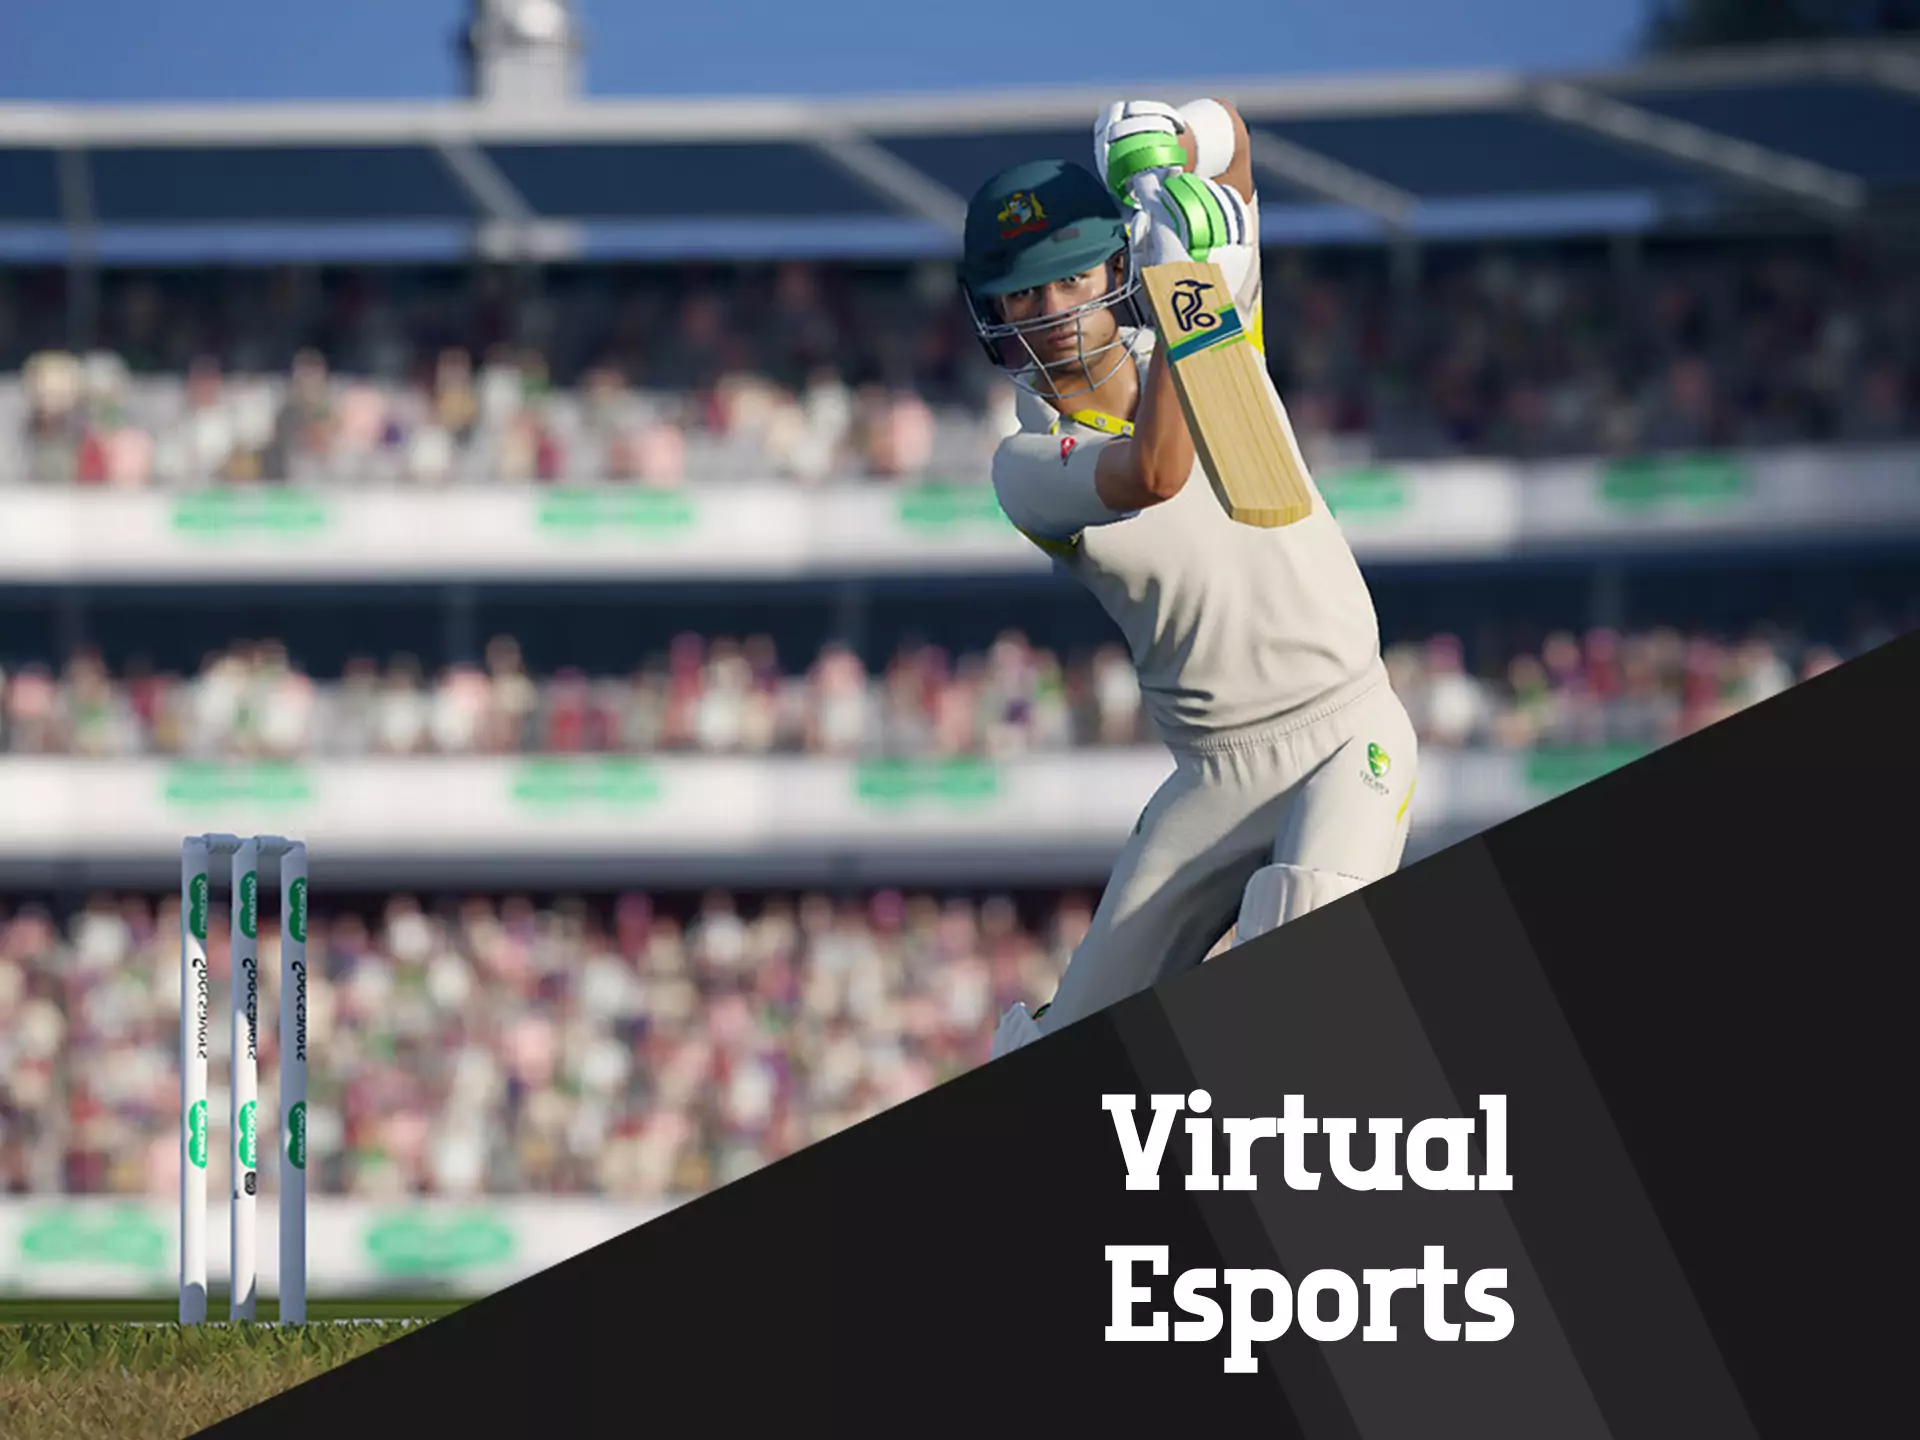 The Fairplay app supports virtual sports betting.